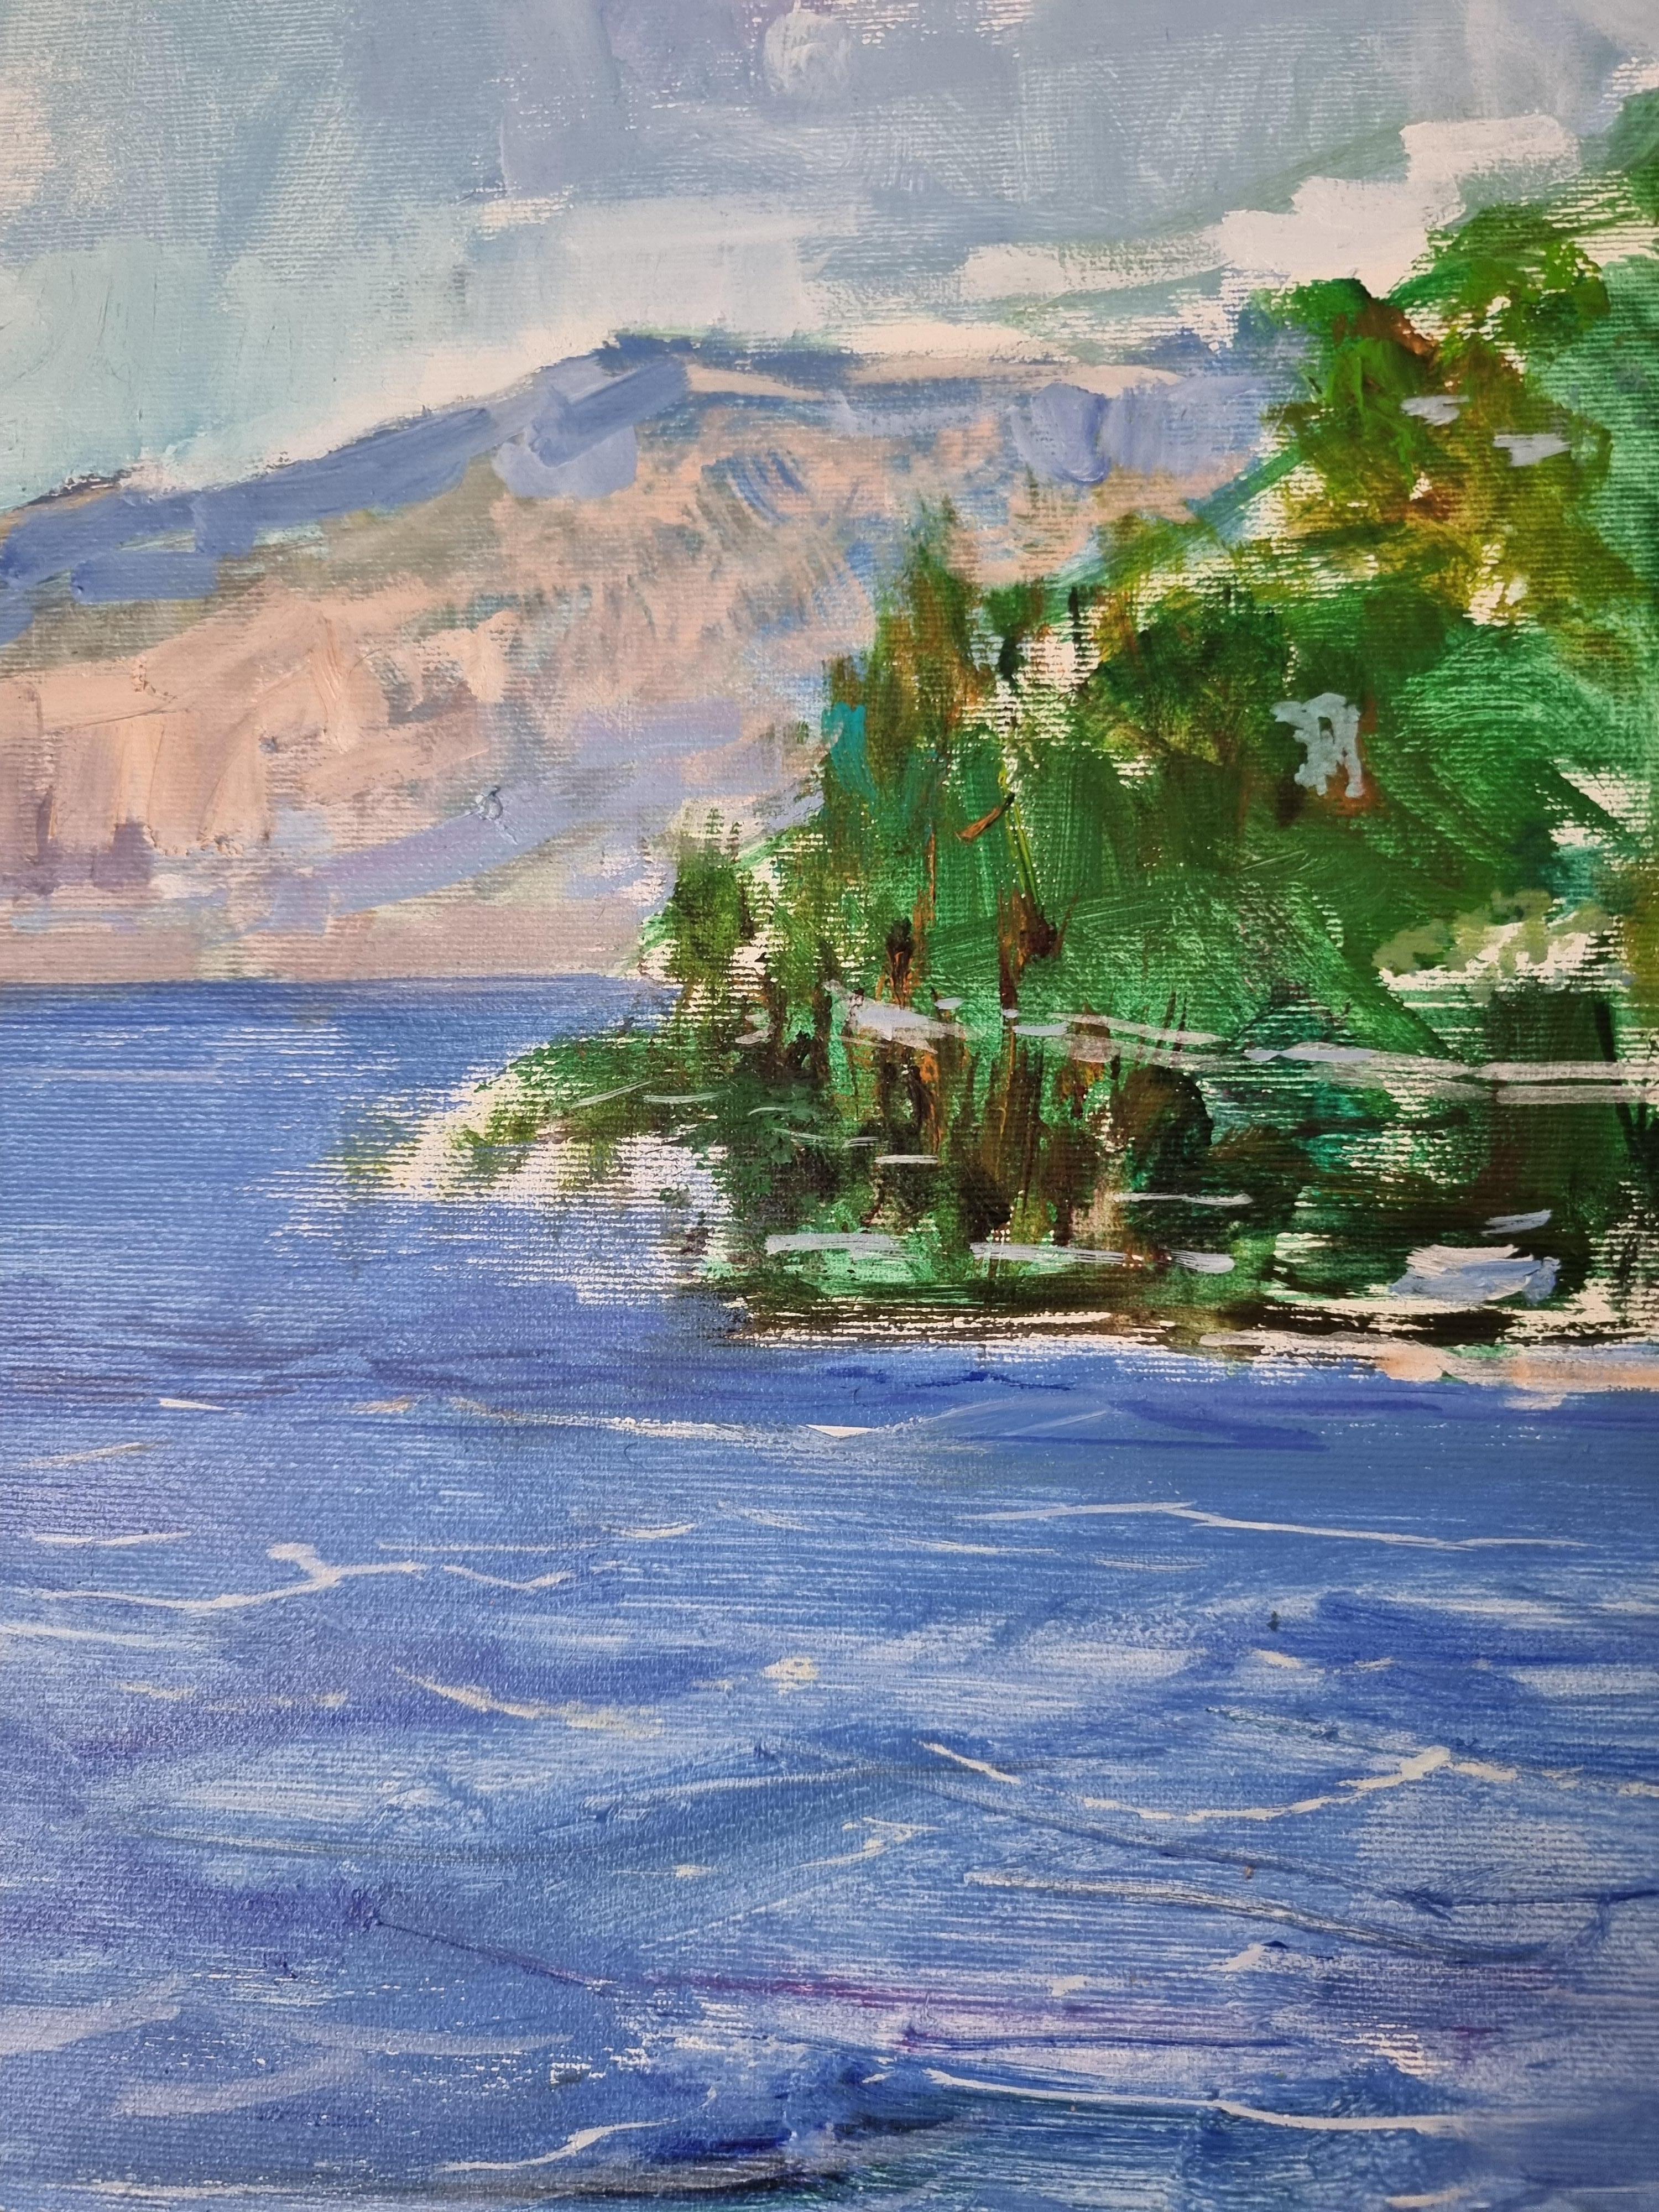  Scorpios Island Greece Christina Onassis Yacht - Landscape Painting For Sale 3